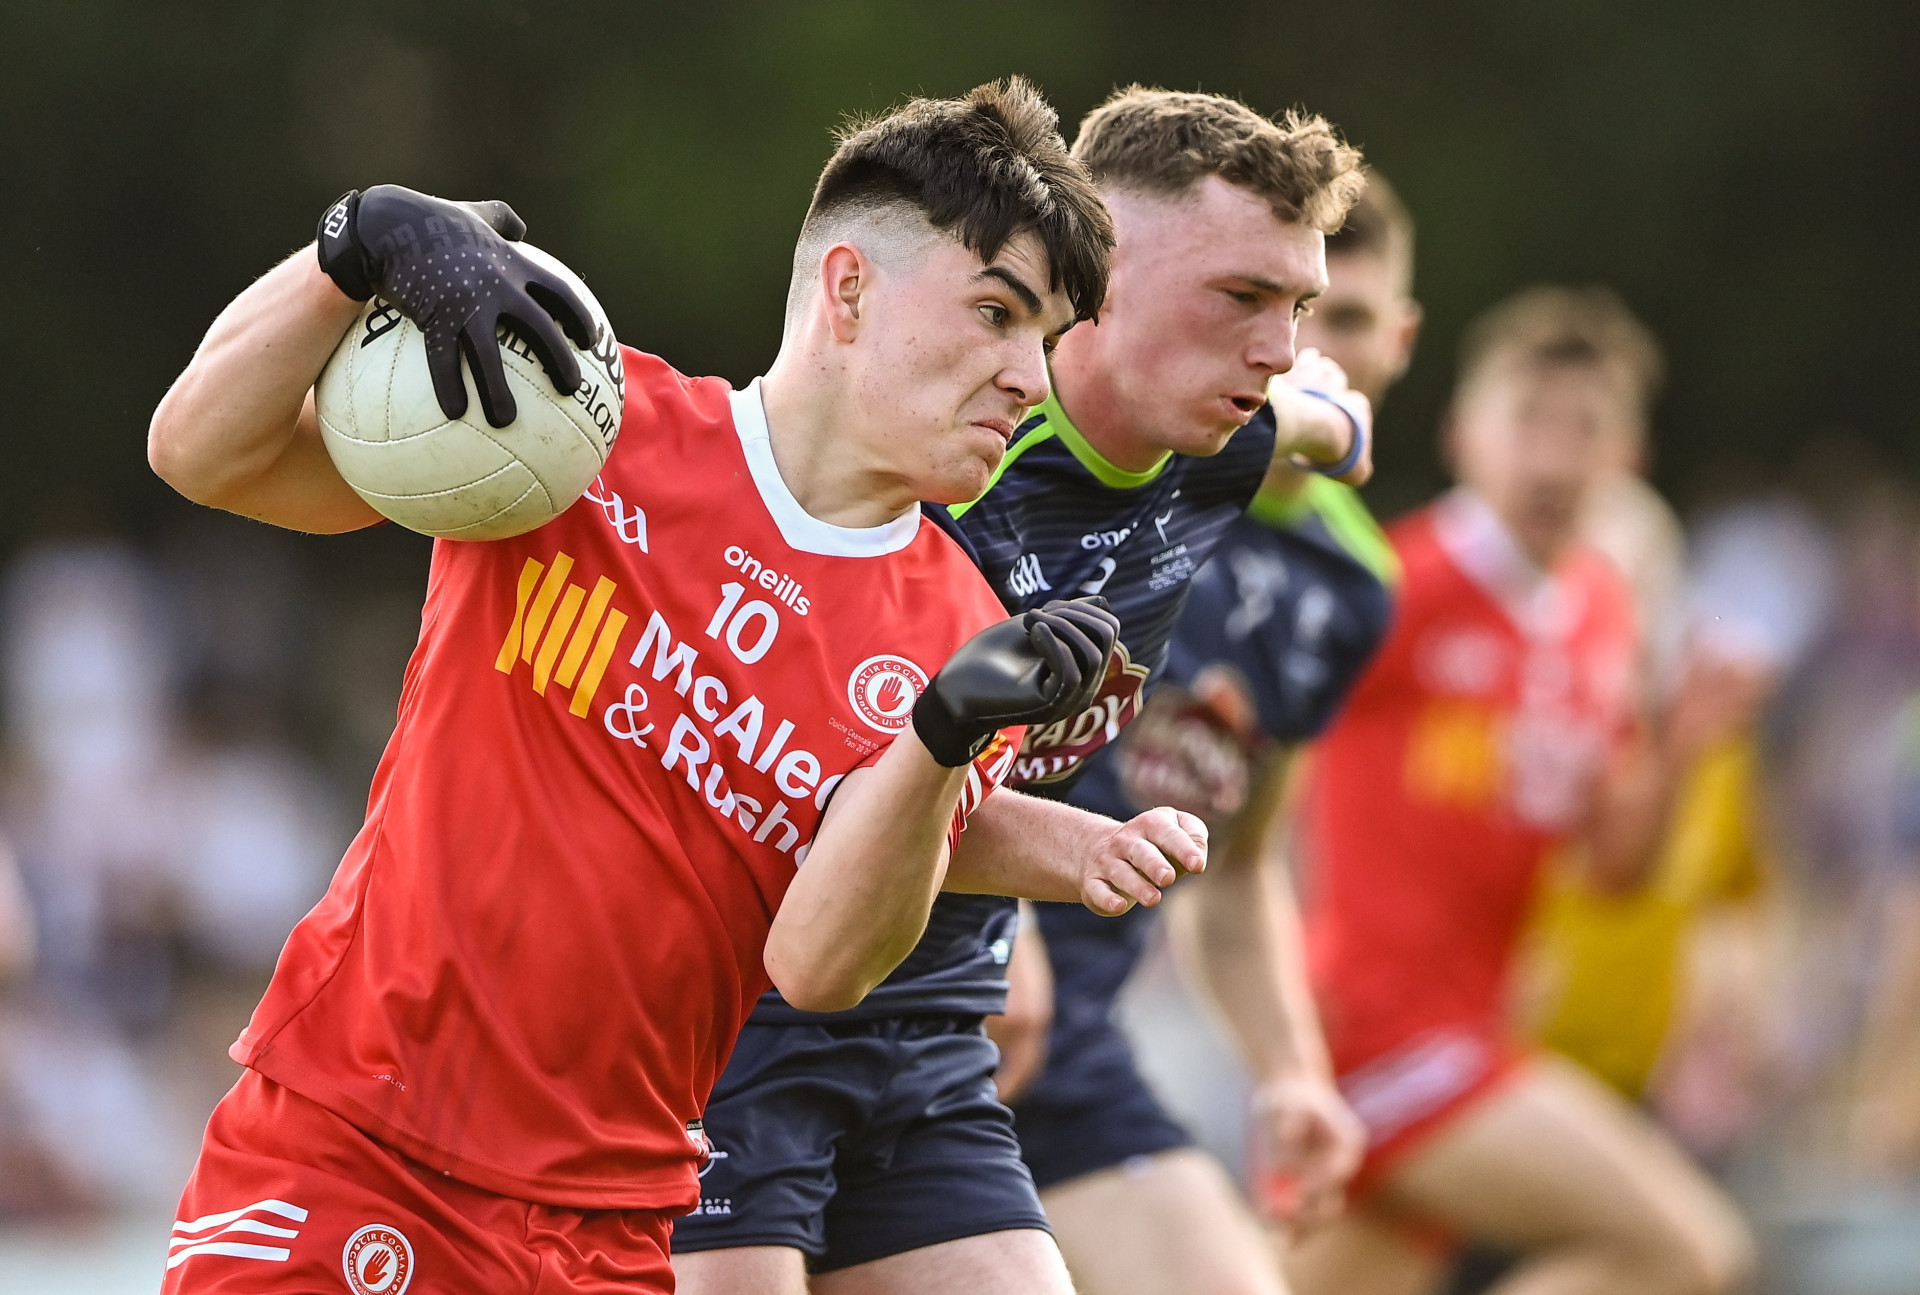 Donaghmore duo Cush and Quinn withdraw from Tyrone set-up